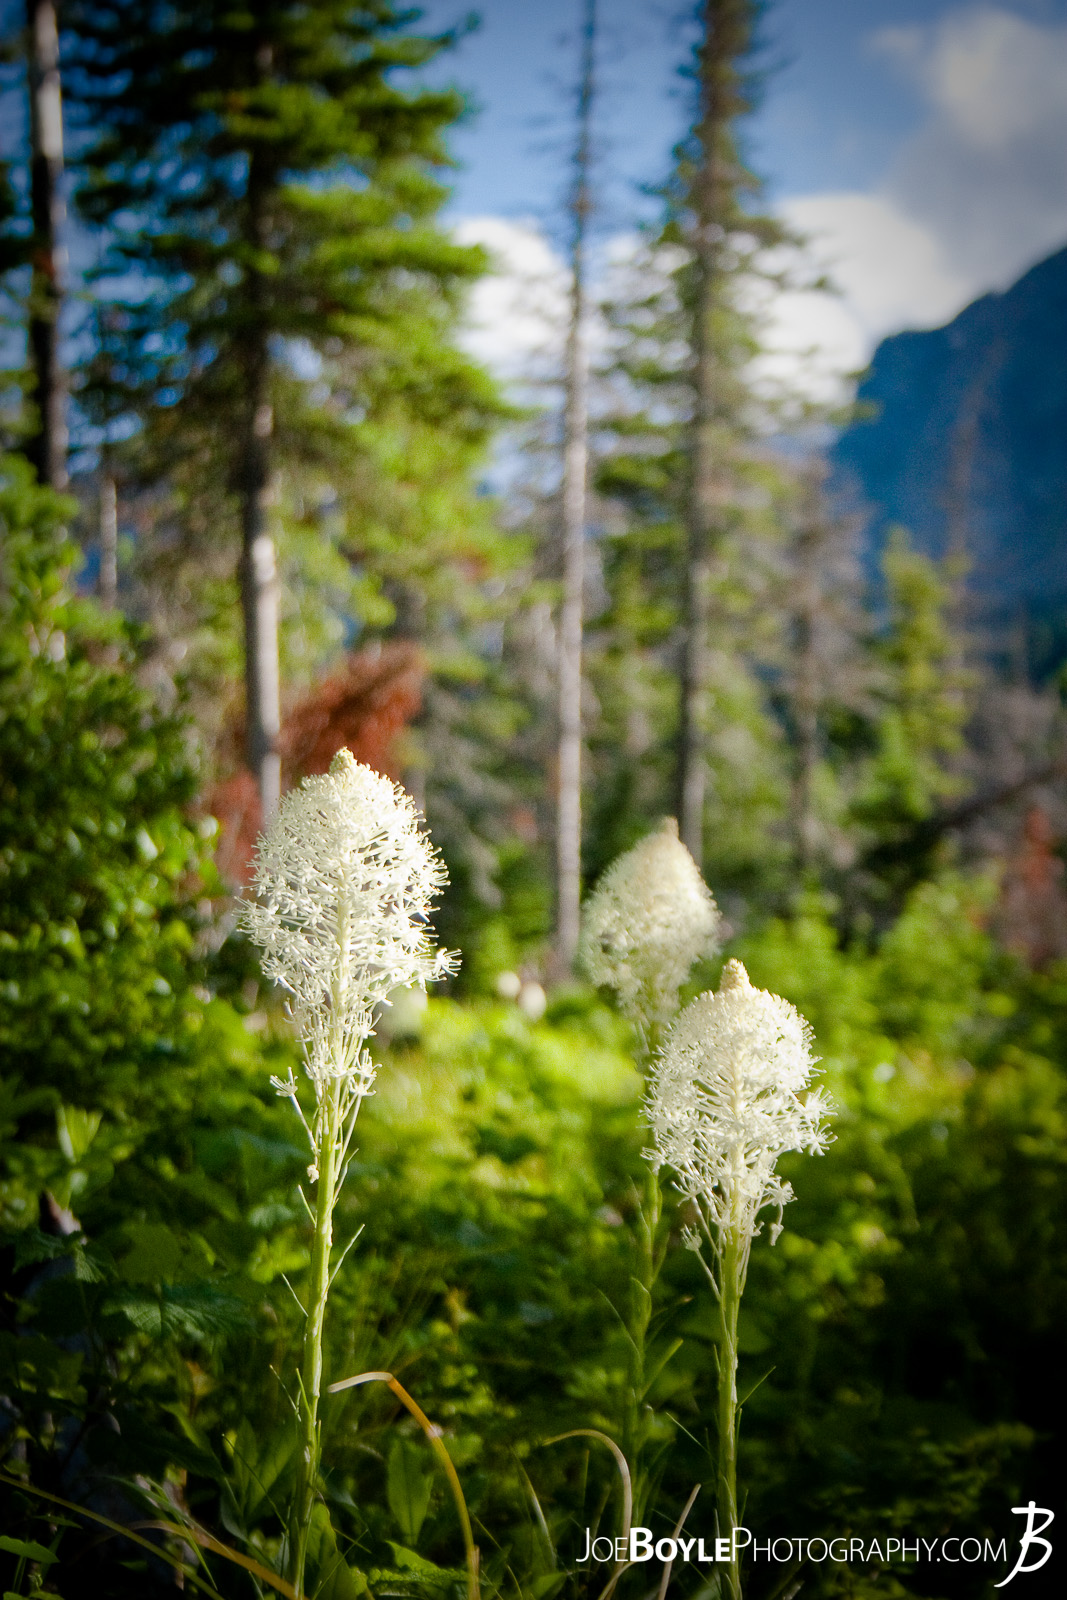  These Bear Grass Flowers are fairly majestic! I was able to spot them while hiking in Glacier National Park in Montana. It's a beautiful park! 